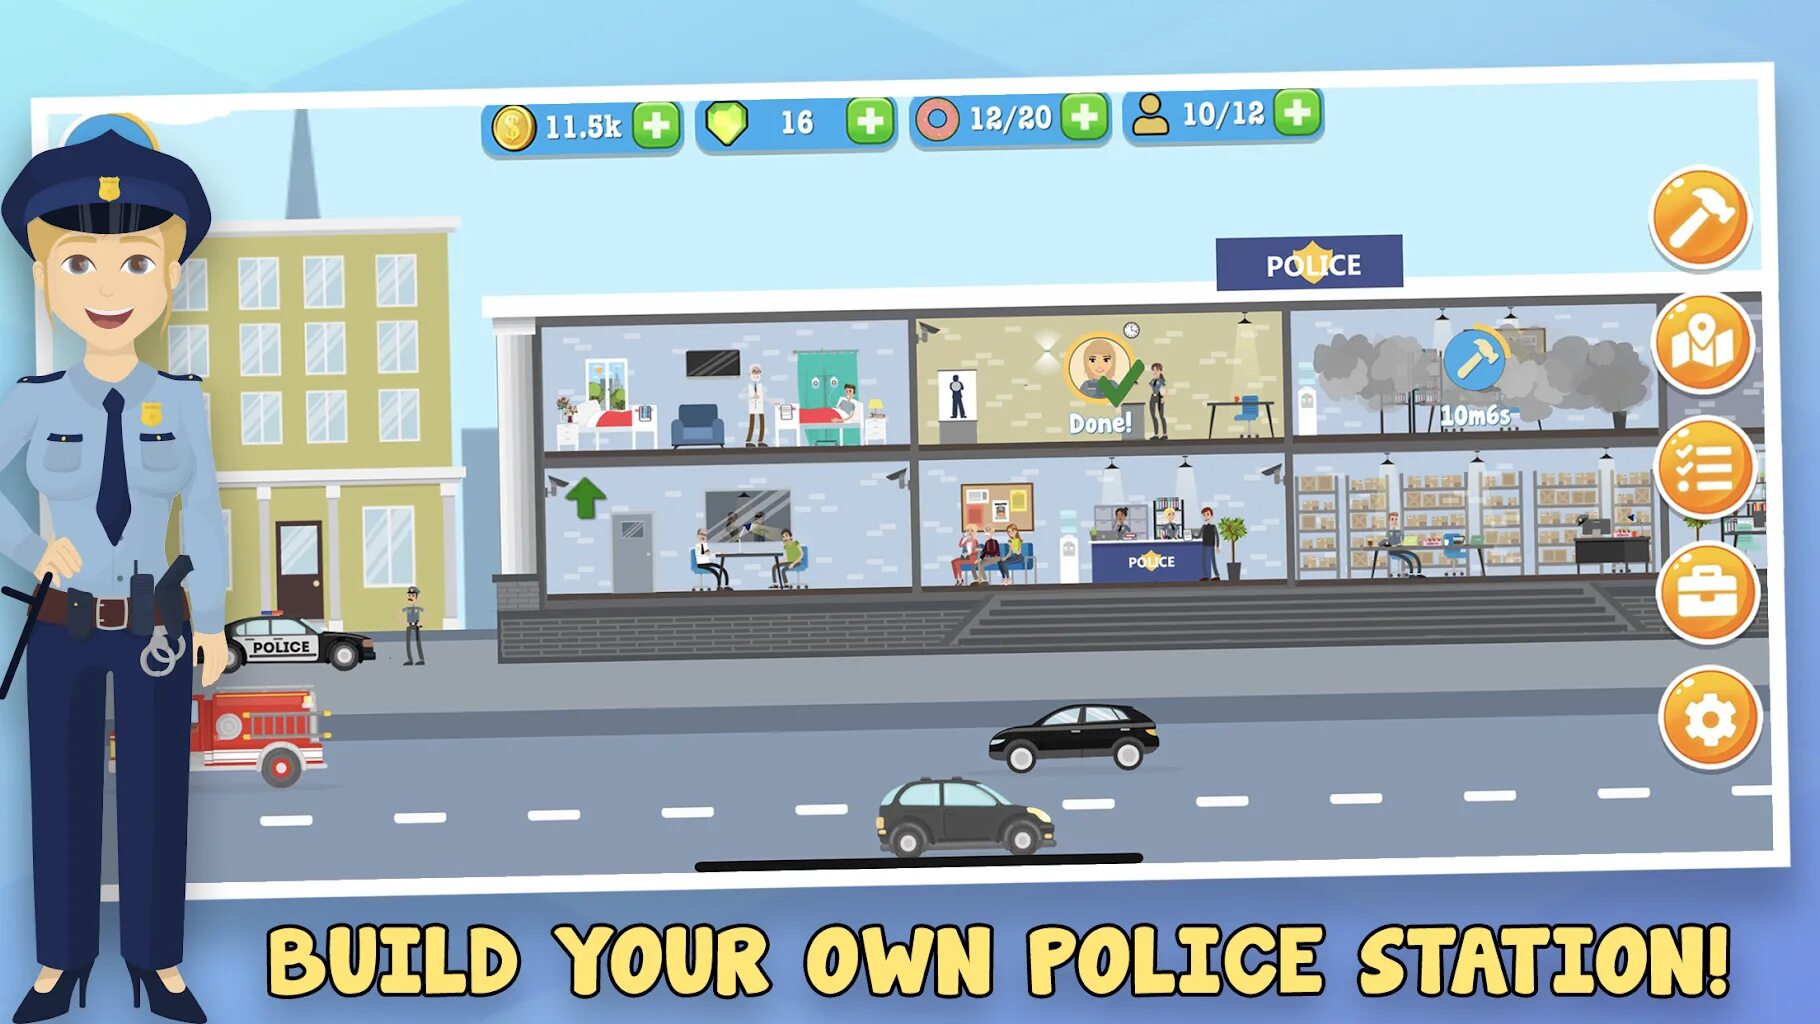 Police department tycoon mod. Police Station game. Police Station Tycoon. Игра за начальника полицейского участка. Idle Police Tycoon.